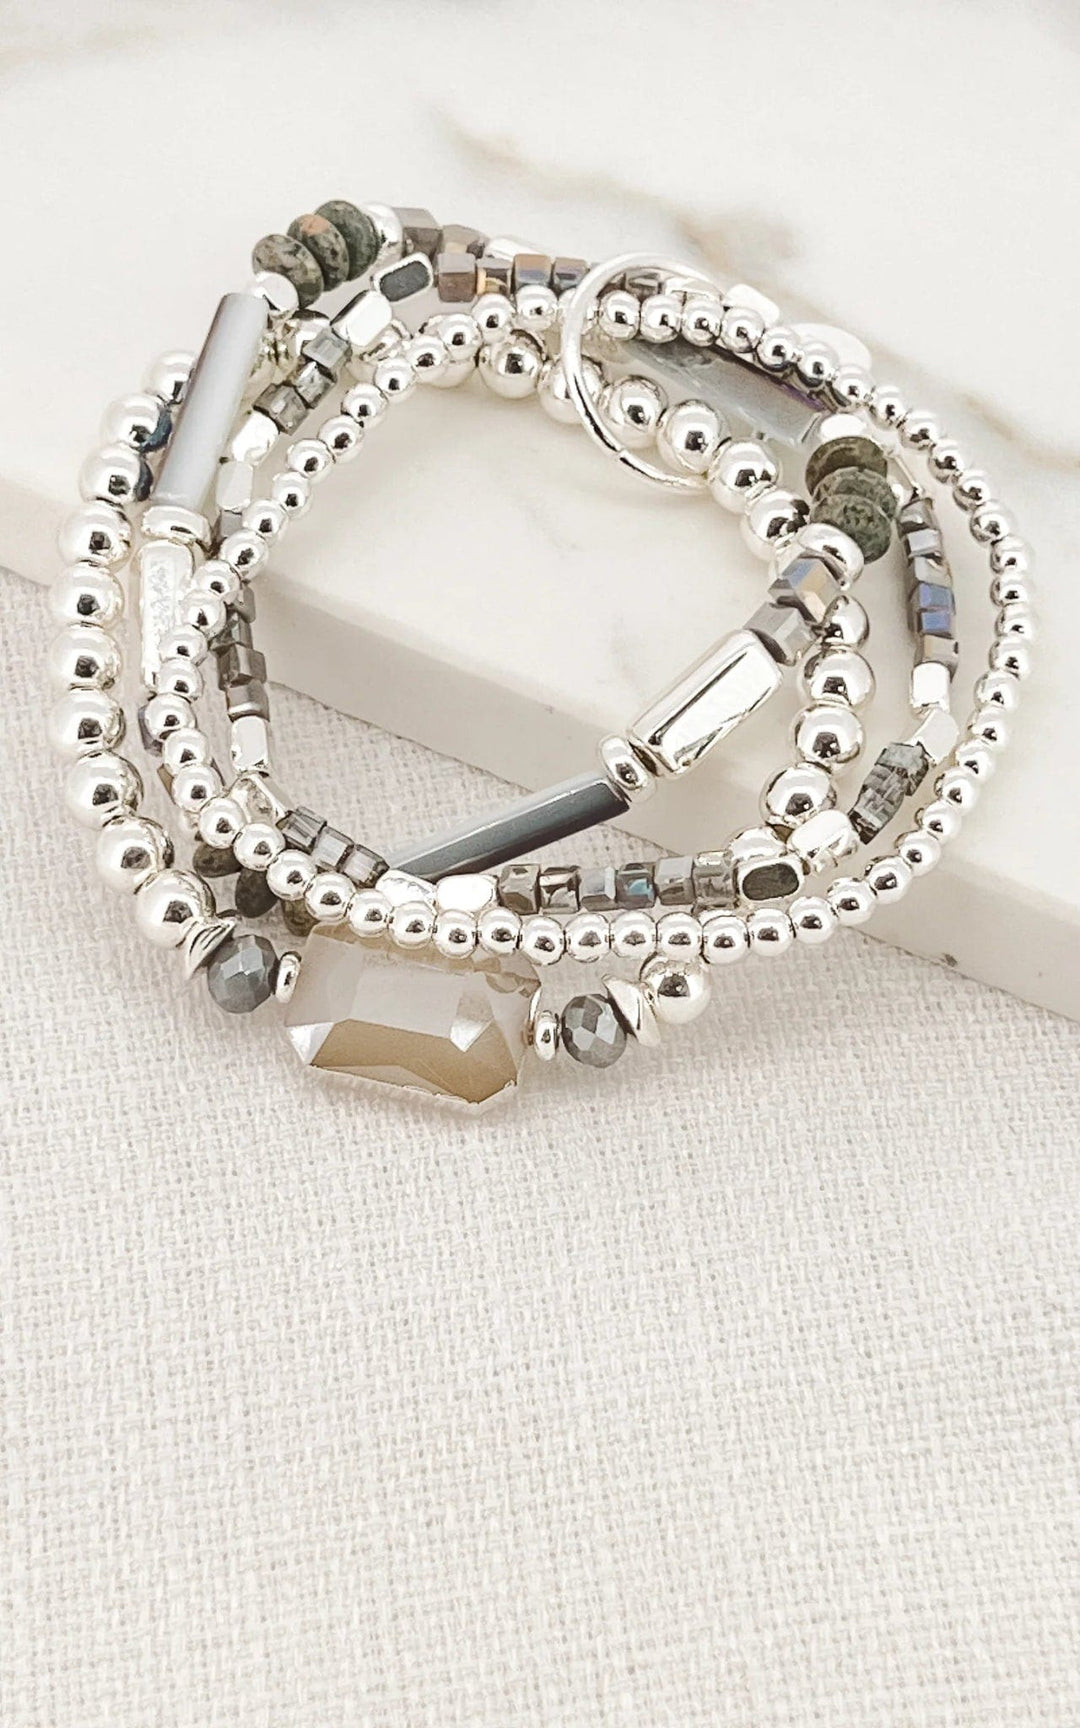 Envy Four layer Bracelet in Silver & Grey - Crabtree Cottage